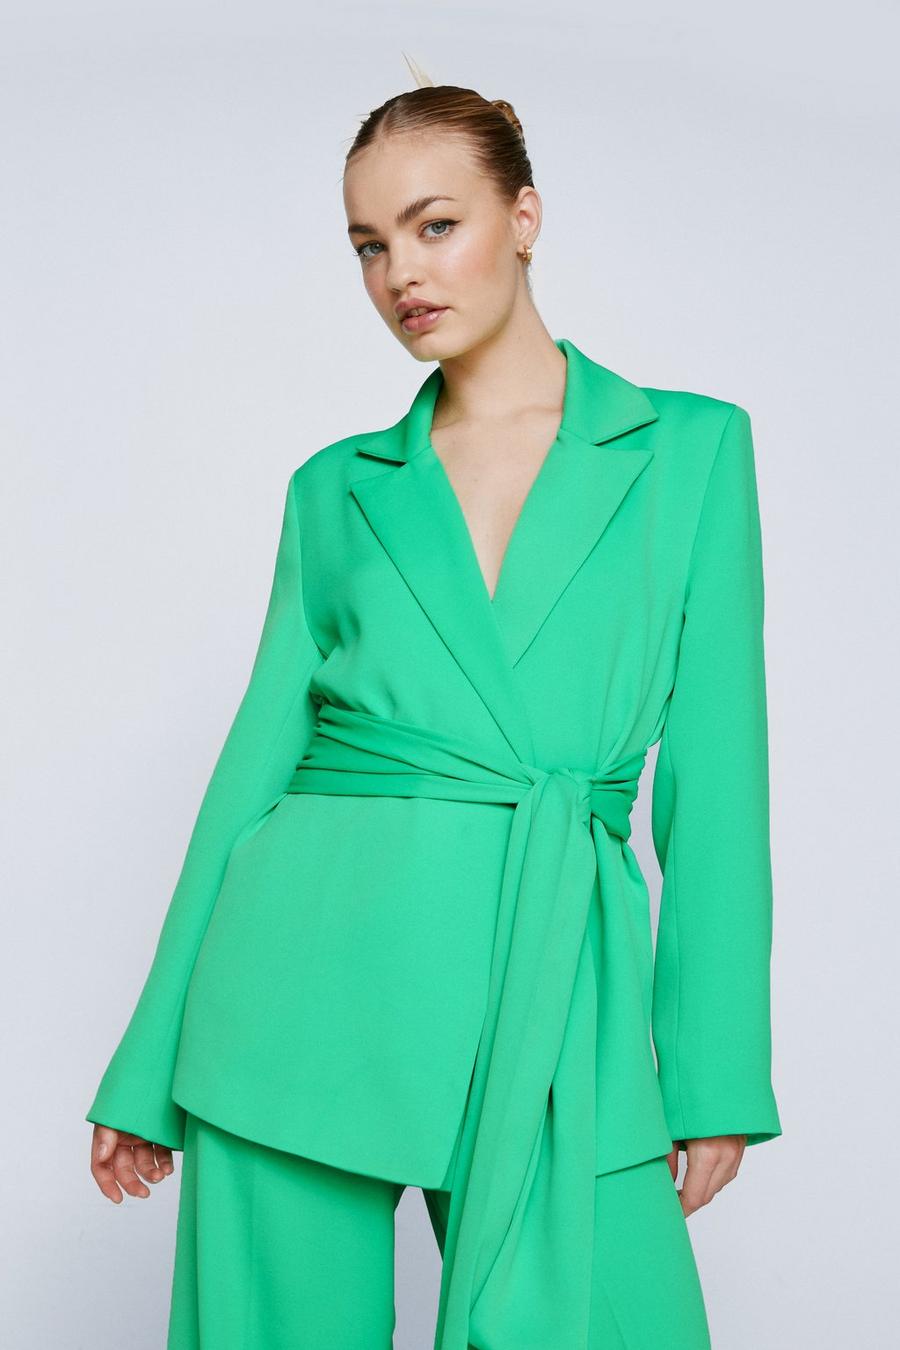 Green Outfits | Women's Green Clothing Online | Nasty Gal